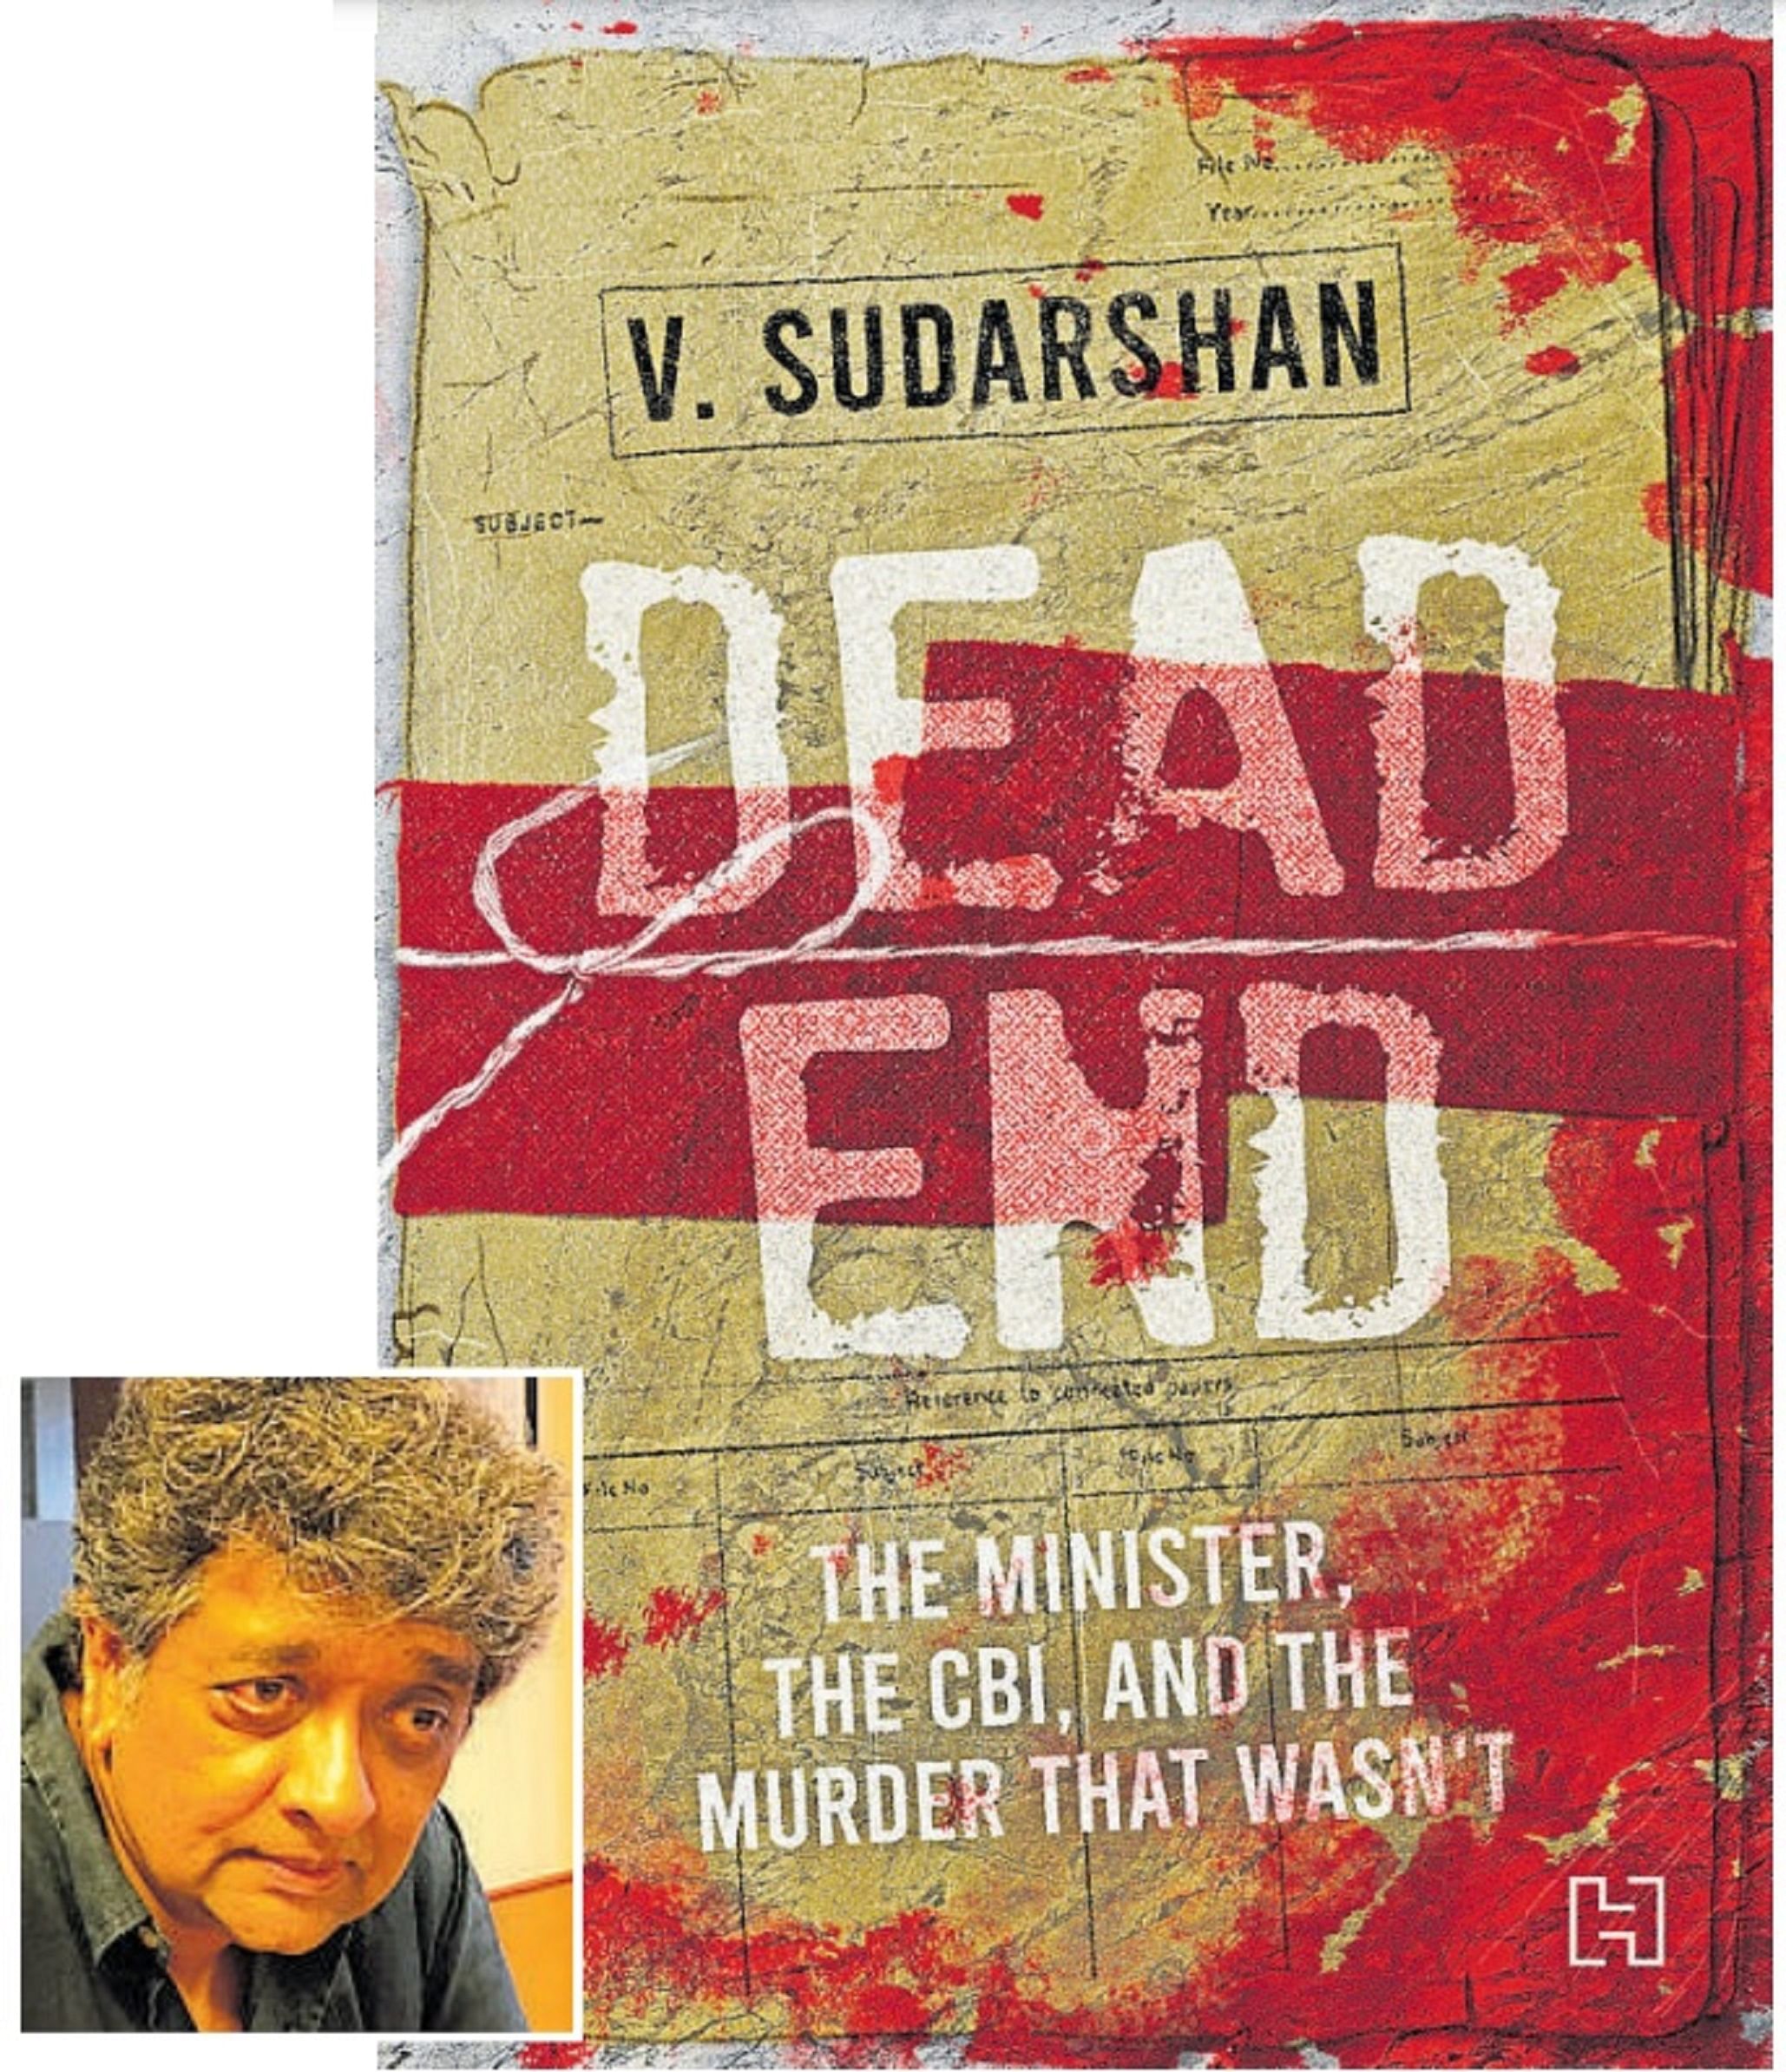 V Sudarshan (inset) wrote ‘Dead End: The Minister, the CBI and the Murder that Wasn’t’ in 2020.